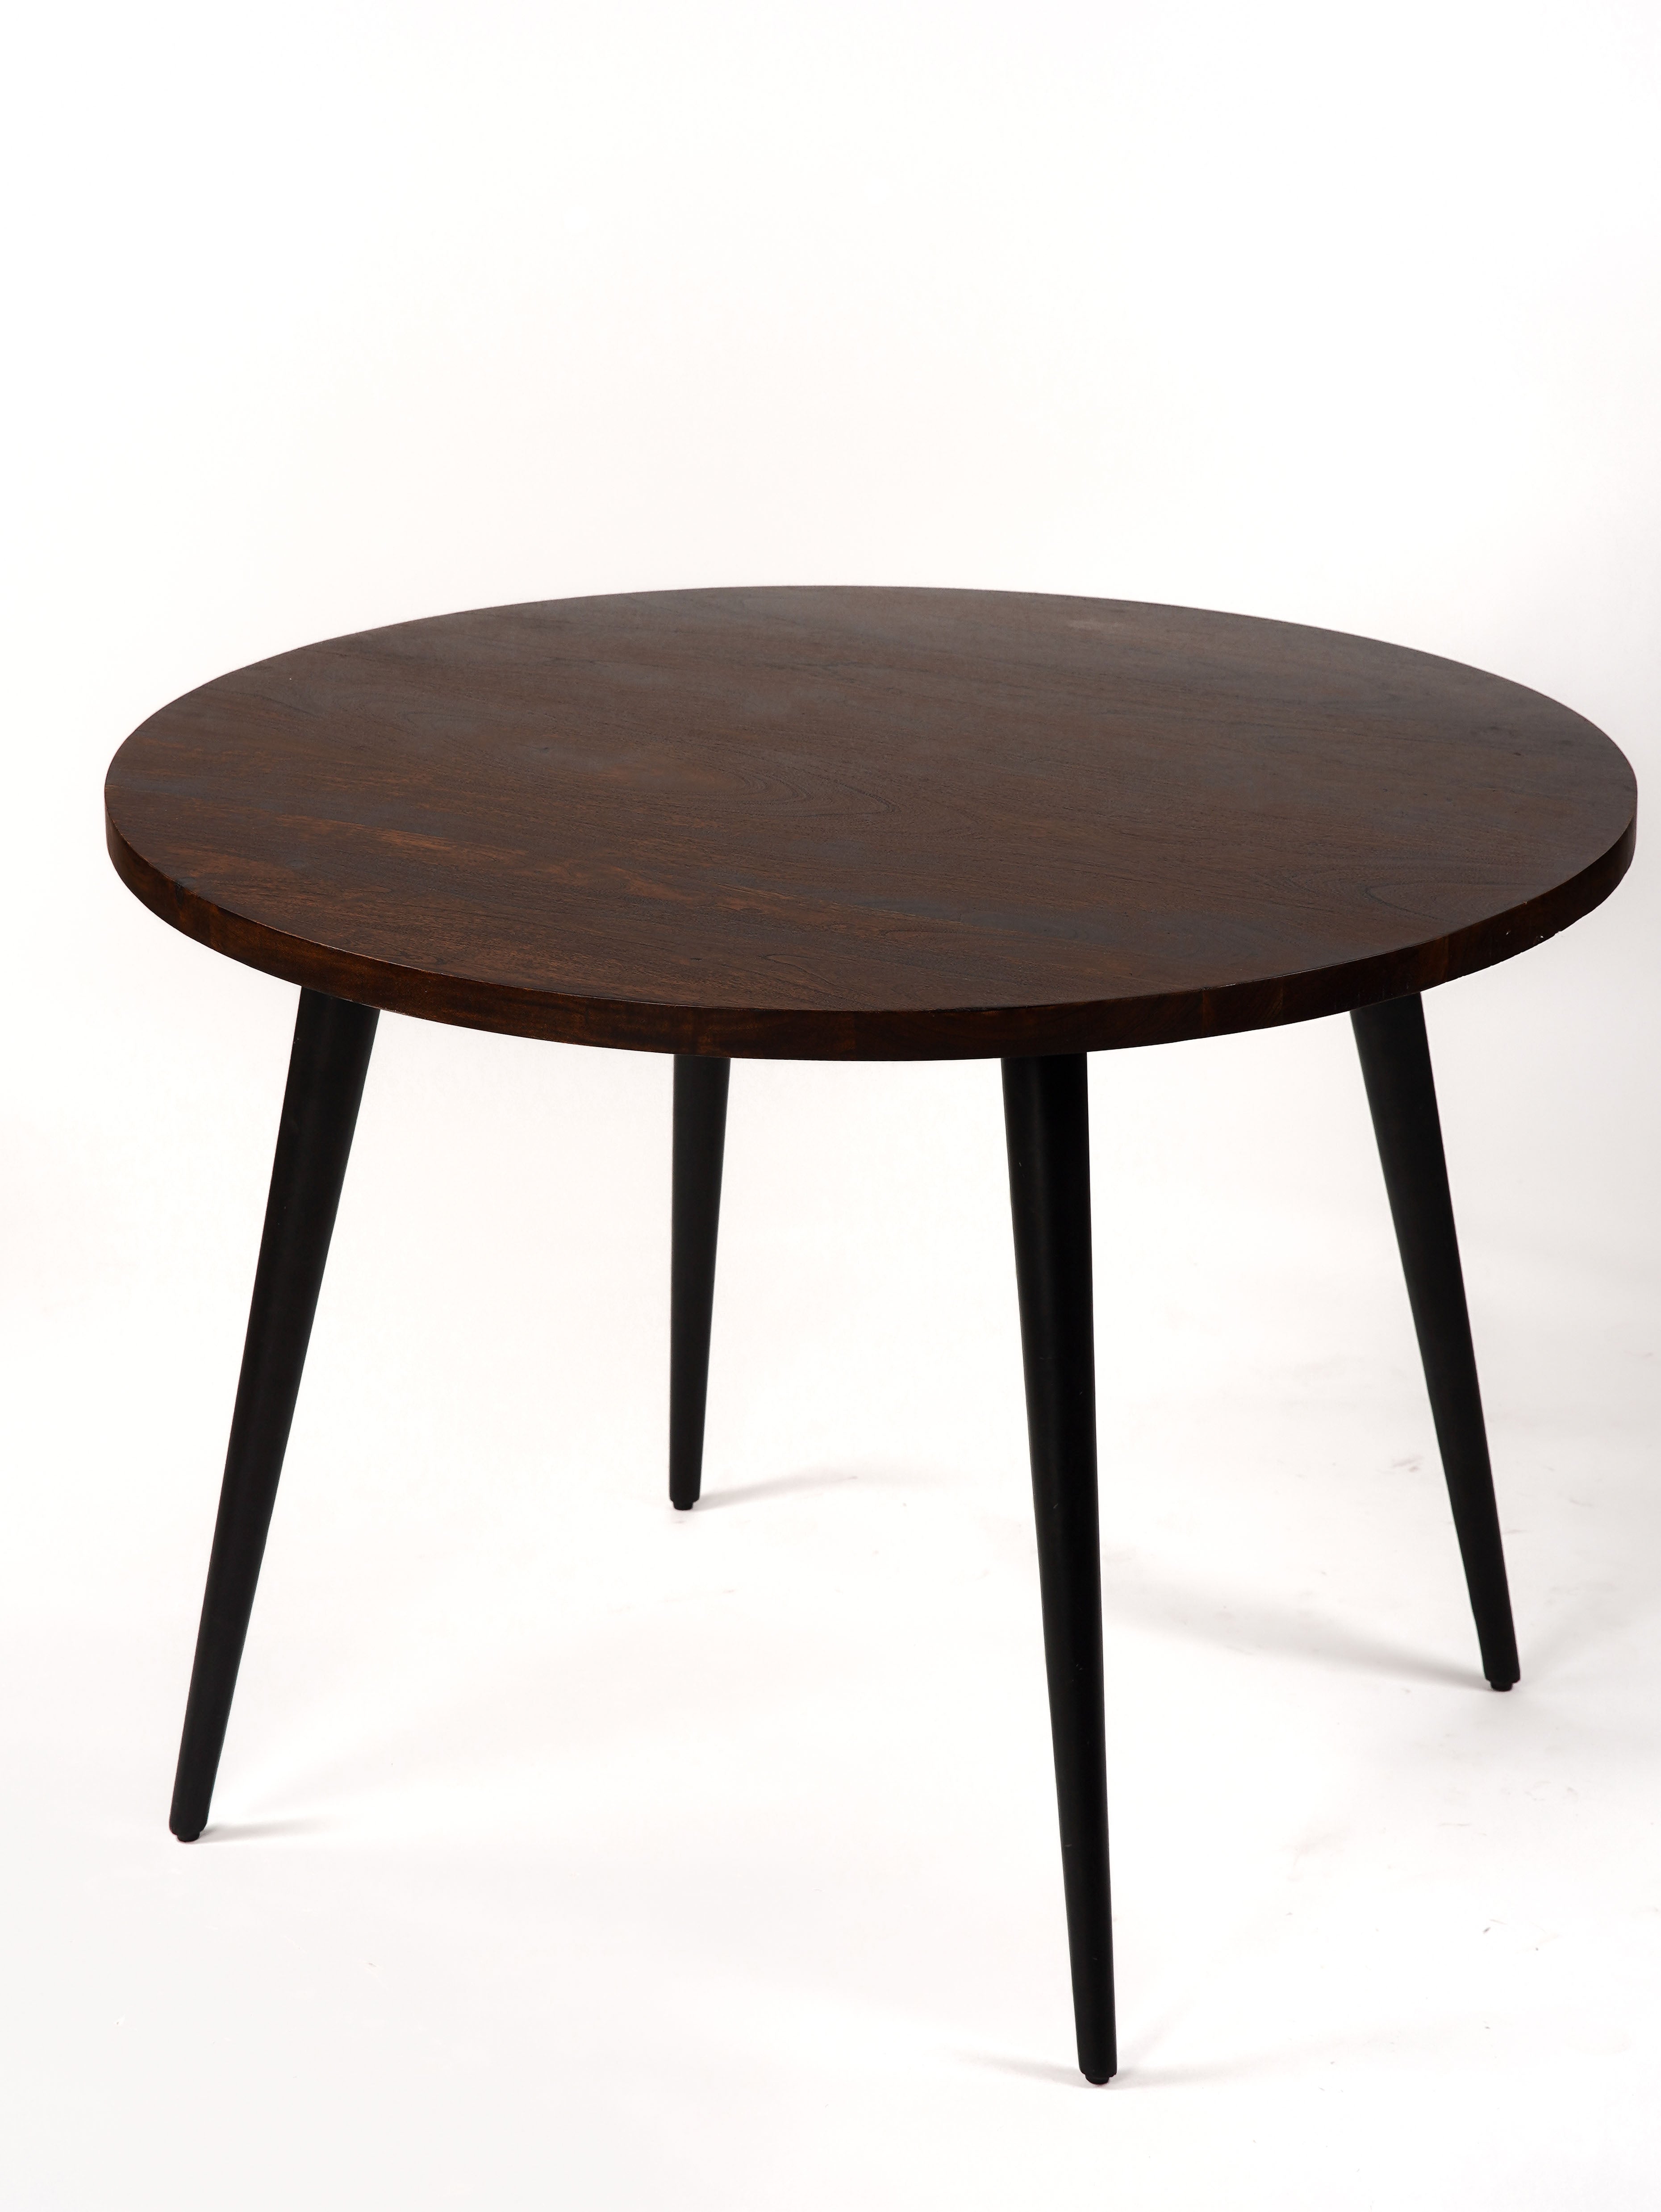 Magnolia Solid Wood Round Dining Table (42") - Walnut